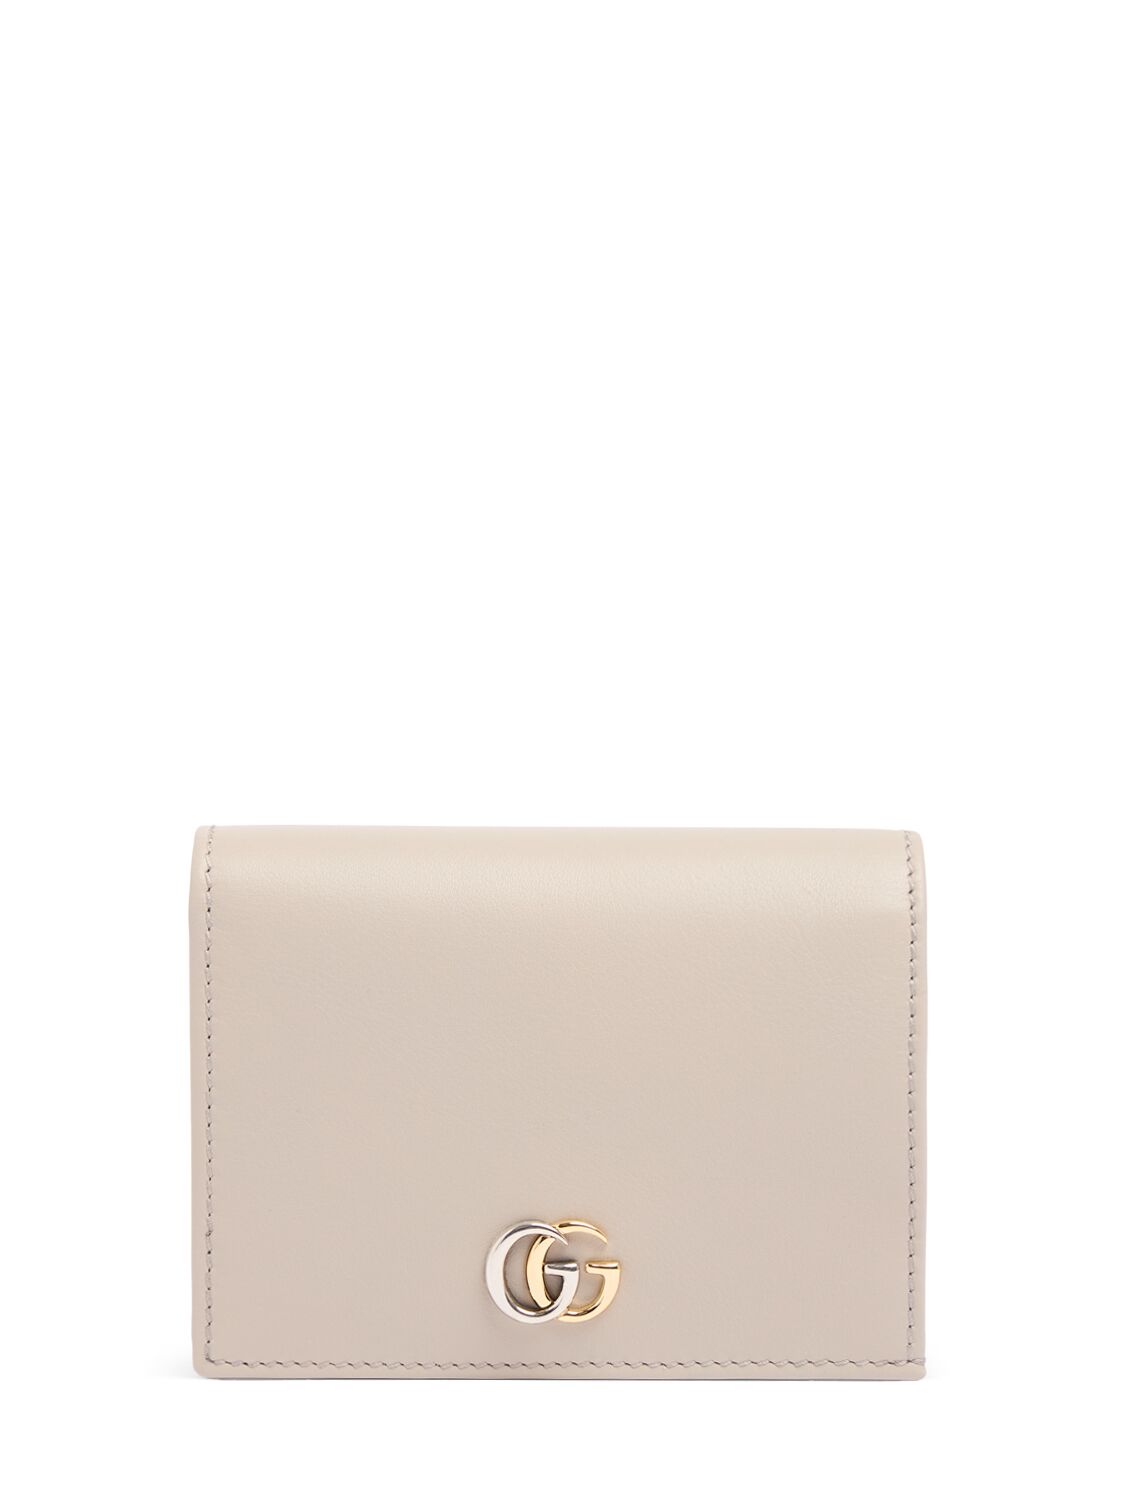 Gucci Petite Marmont Leather Card Case In Neutral